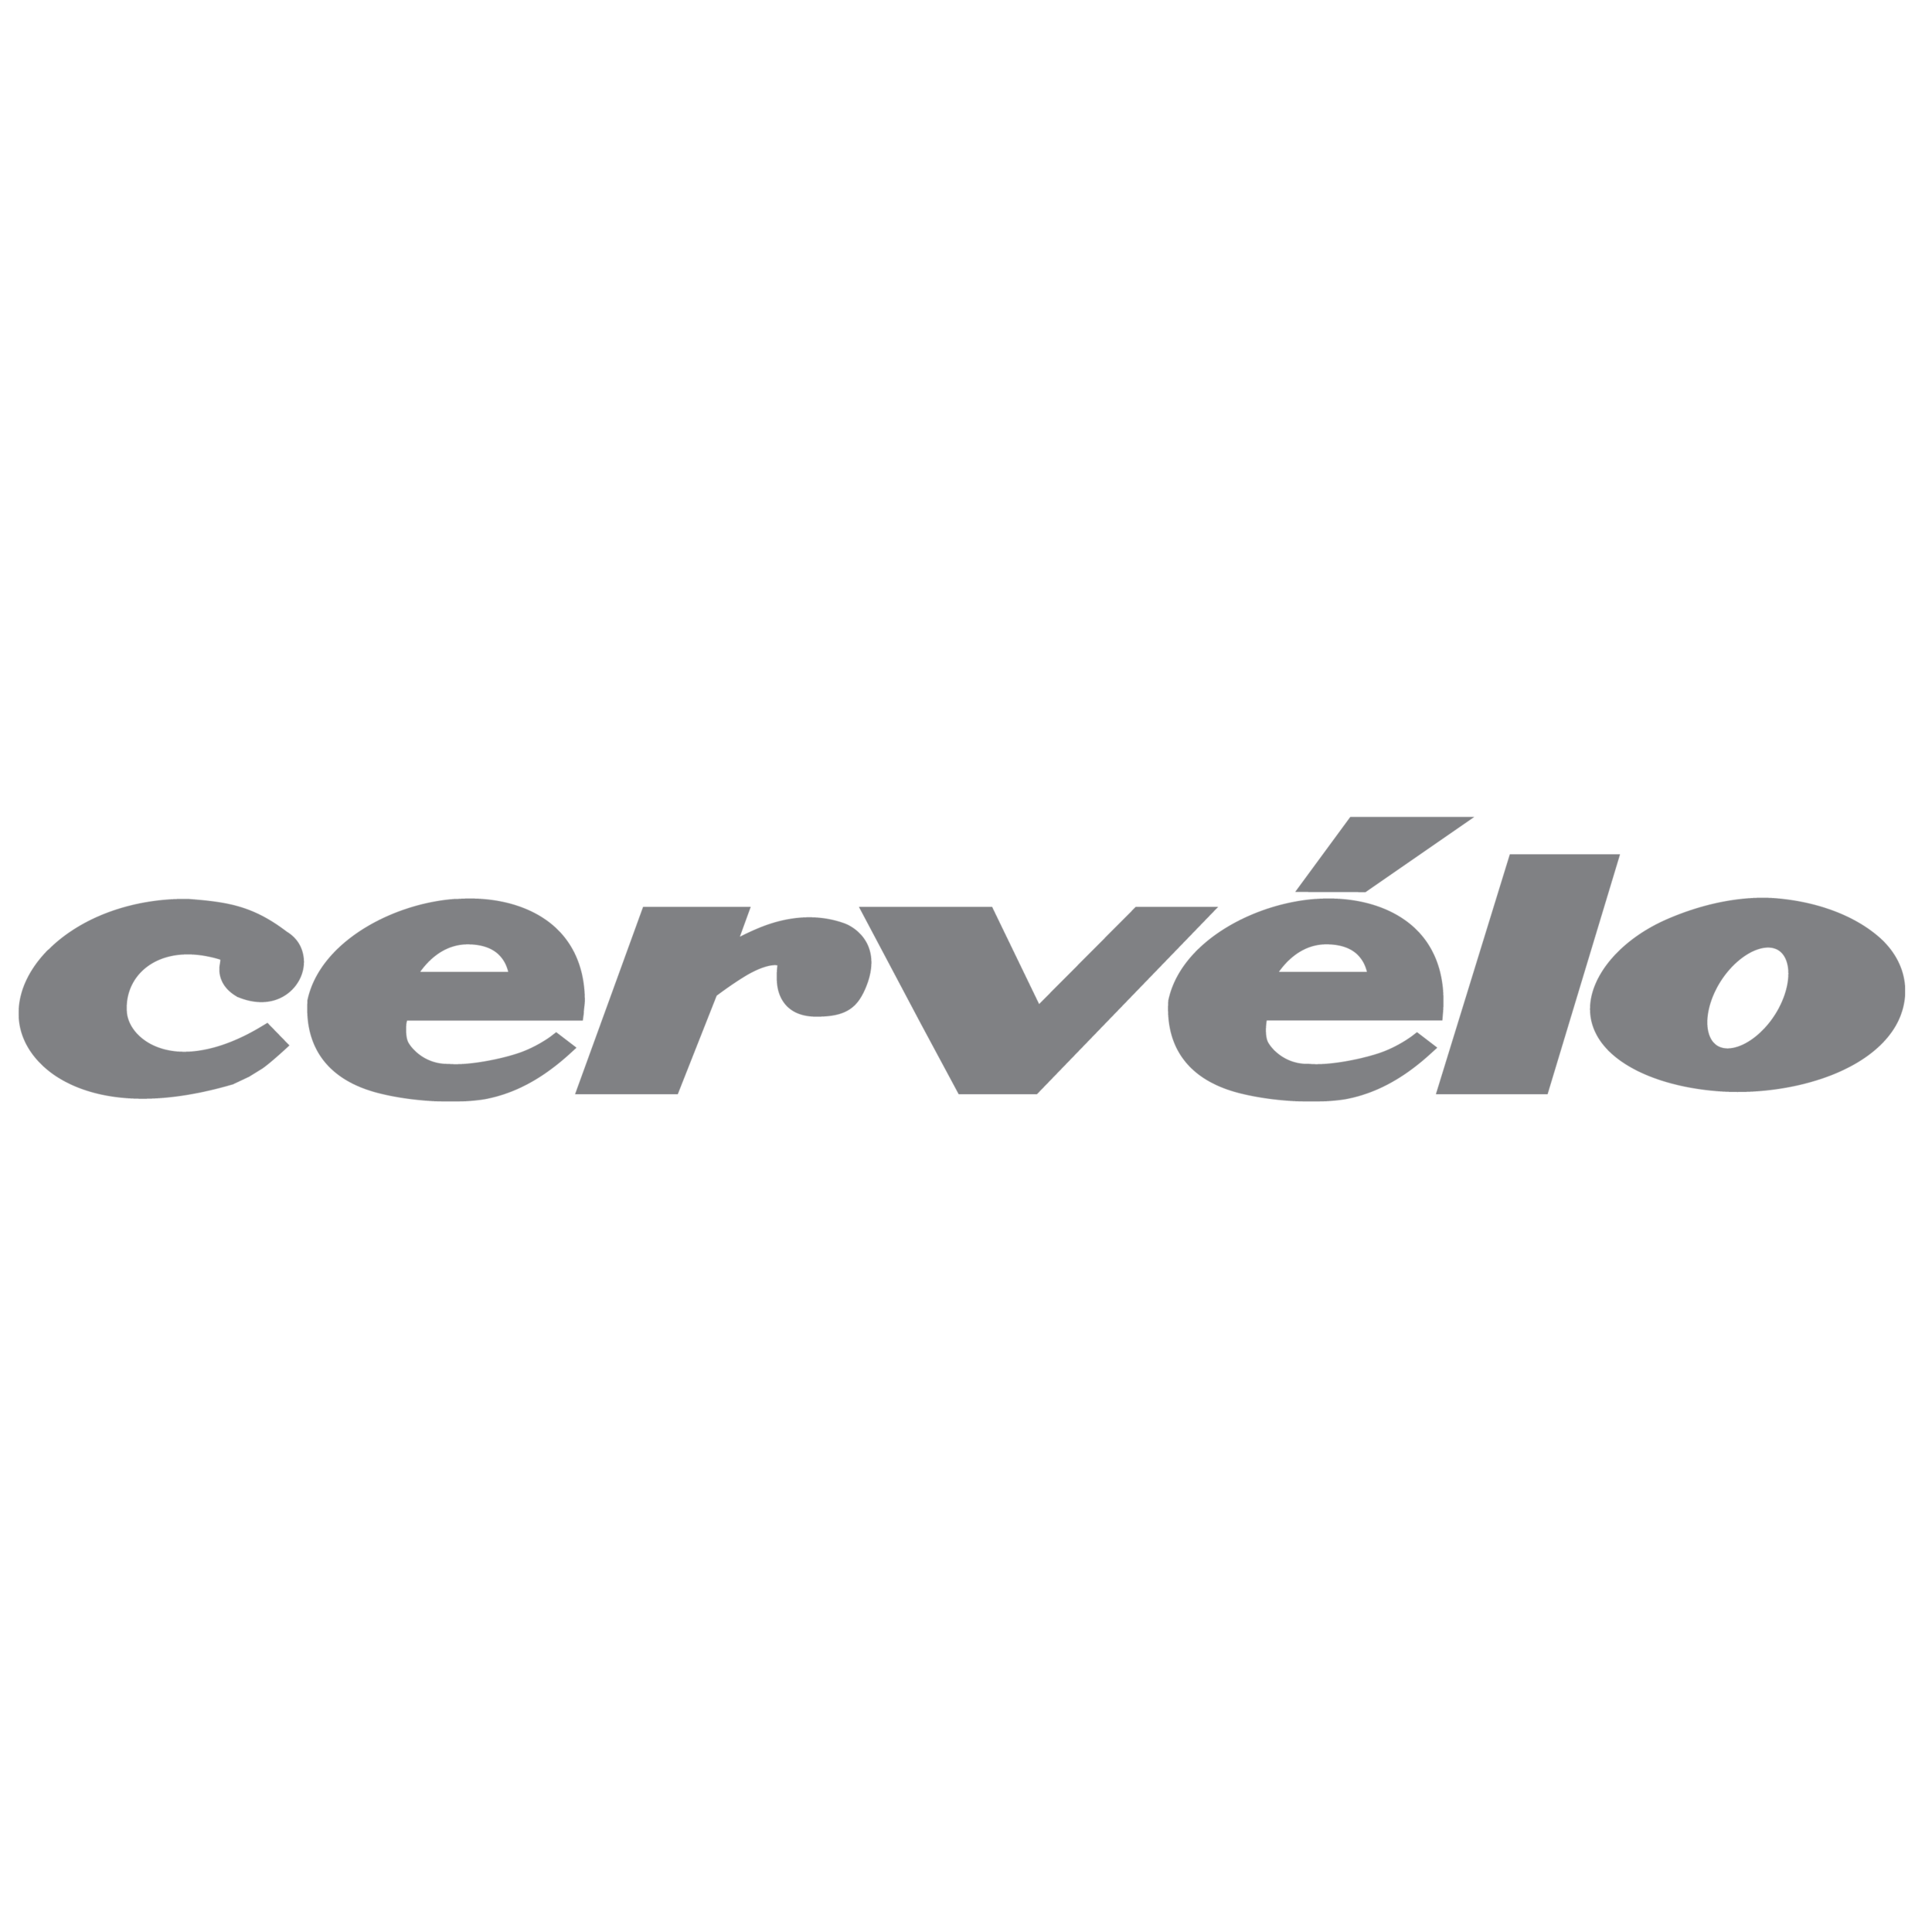 Cervelo - link to landing page